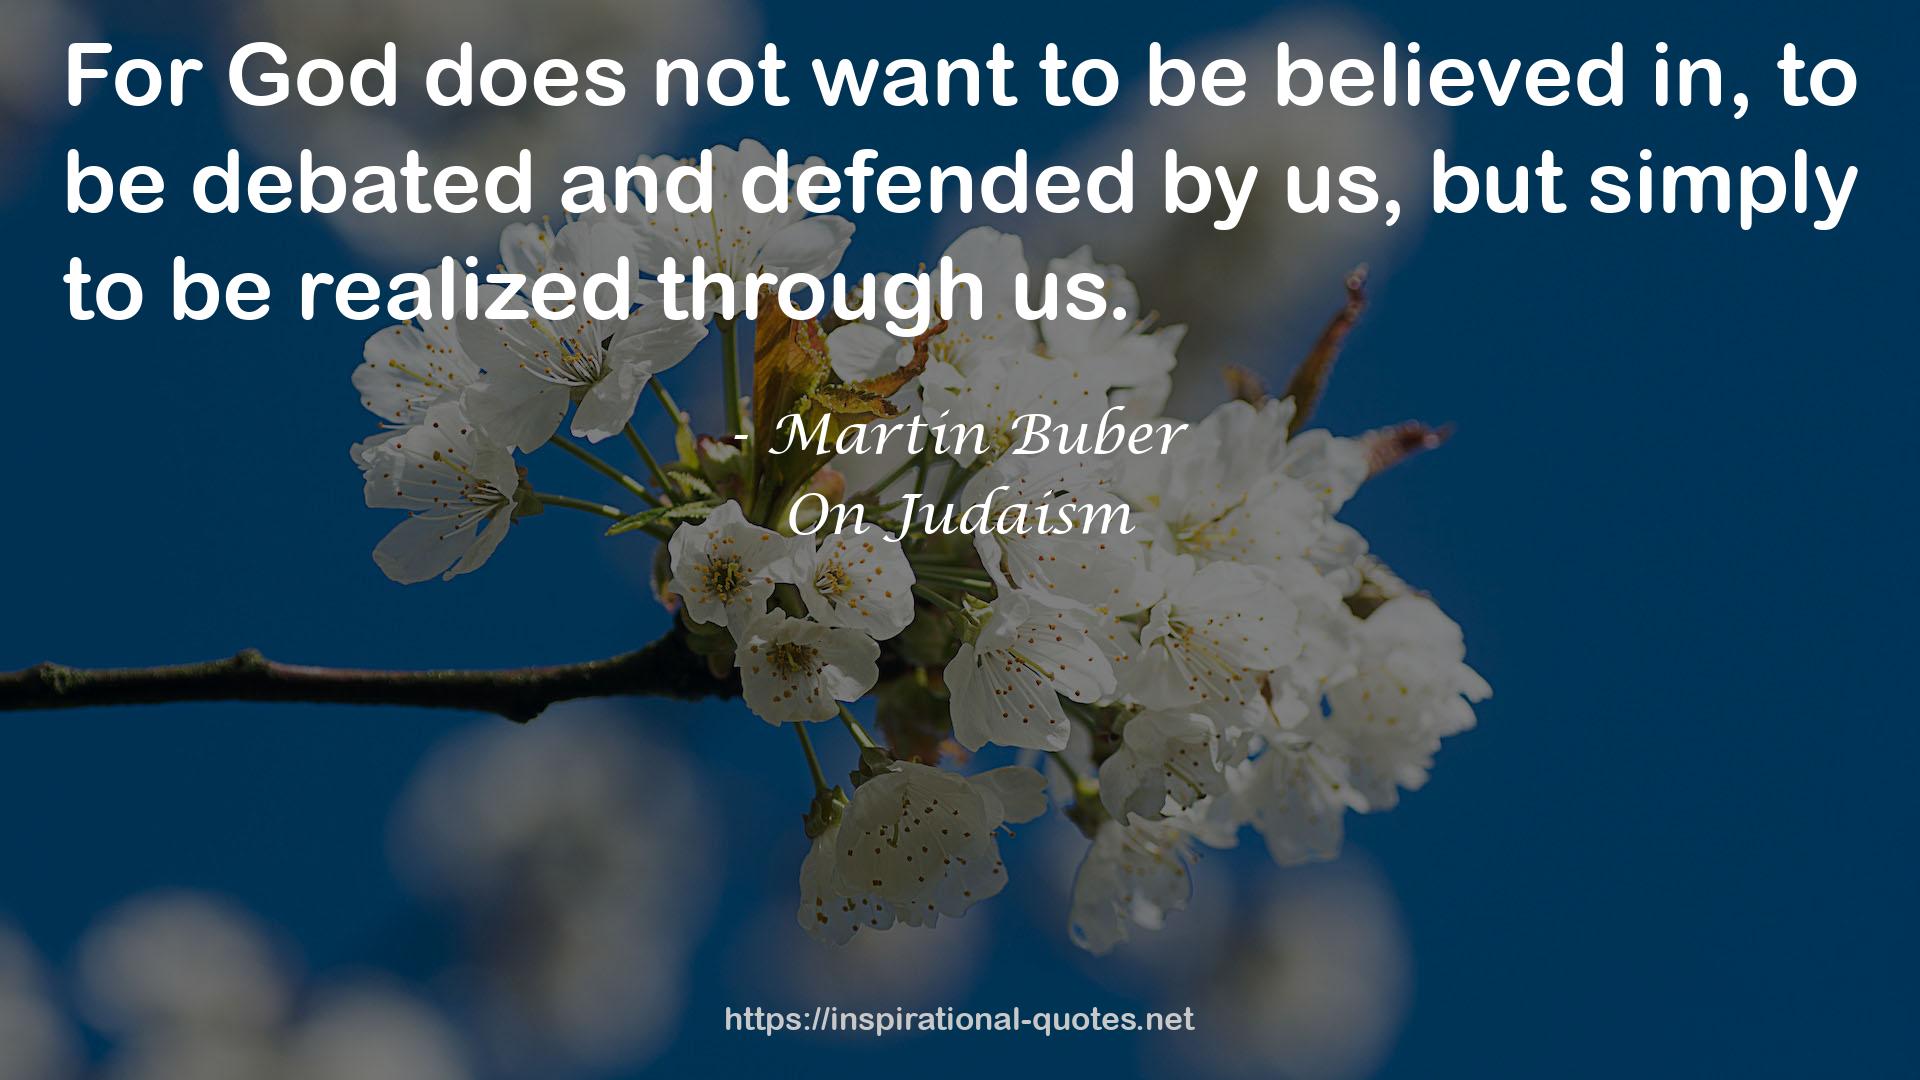 On Judaism QUOTES